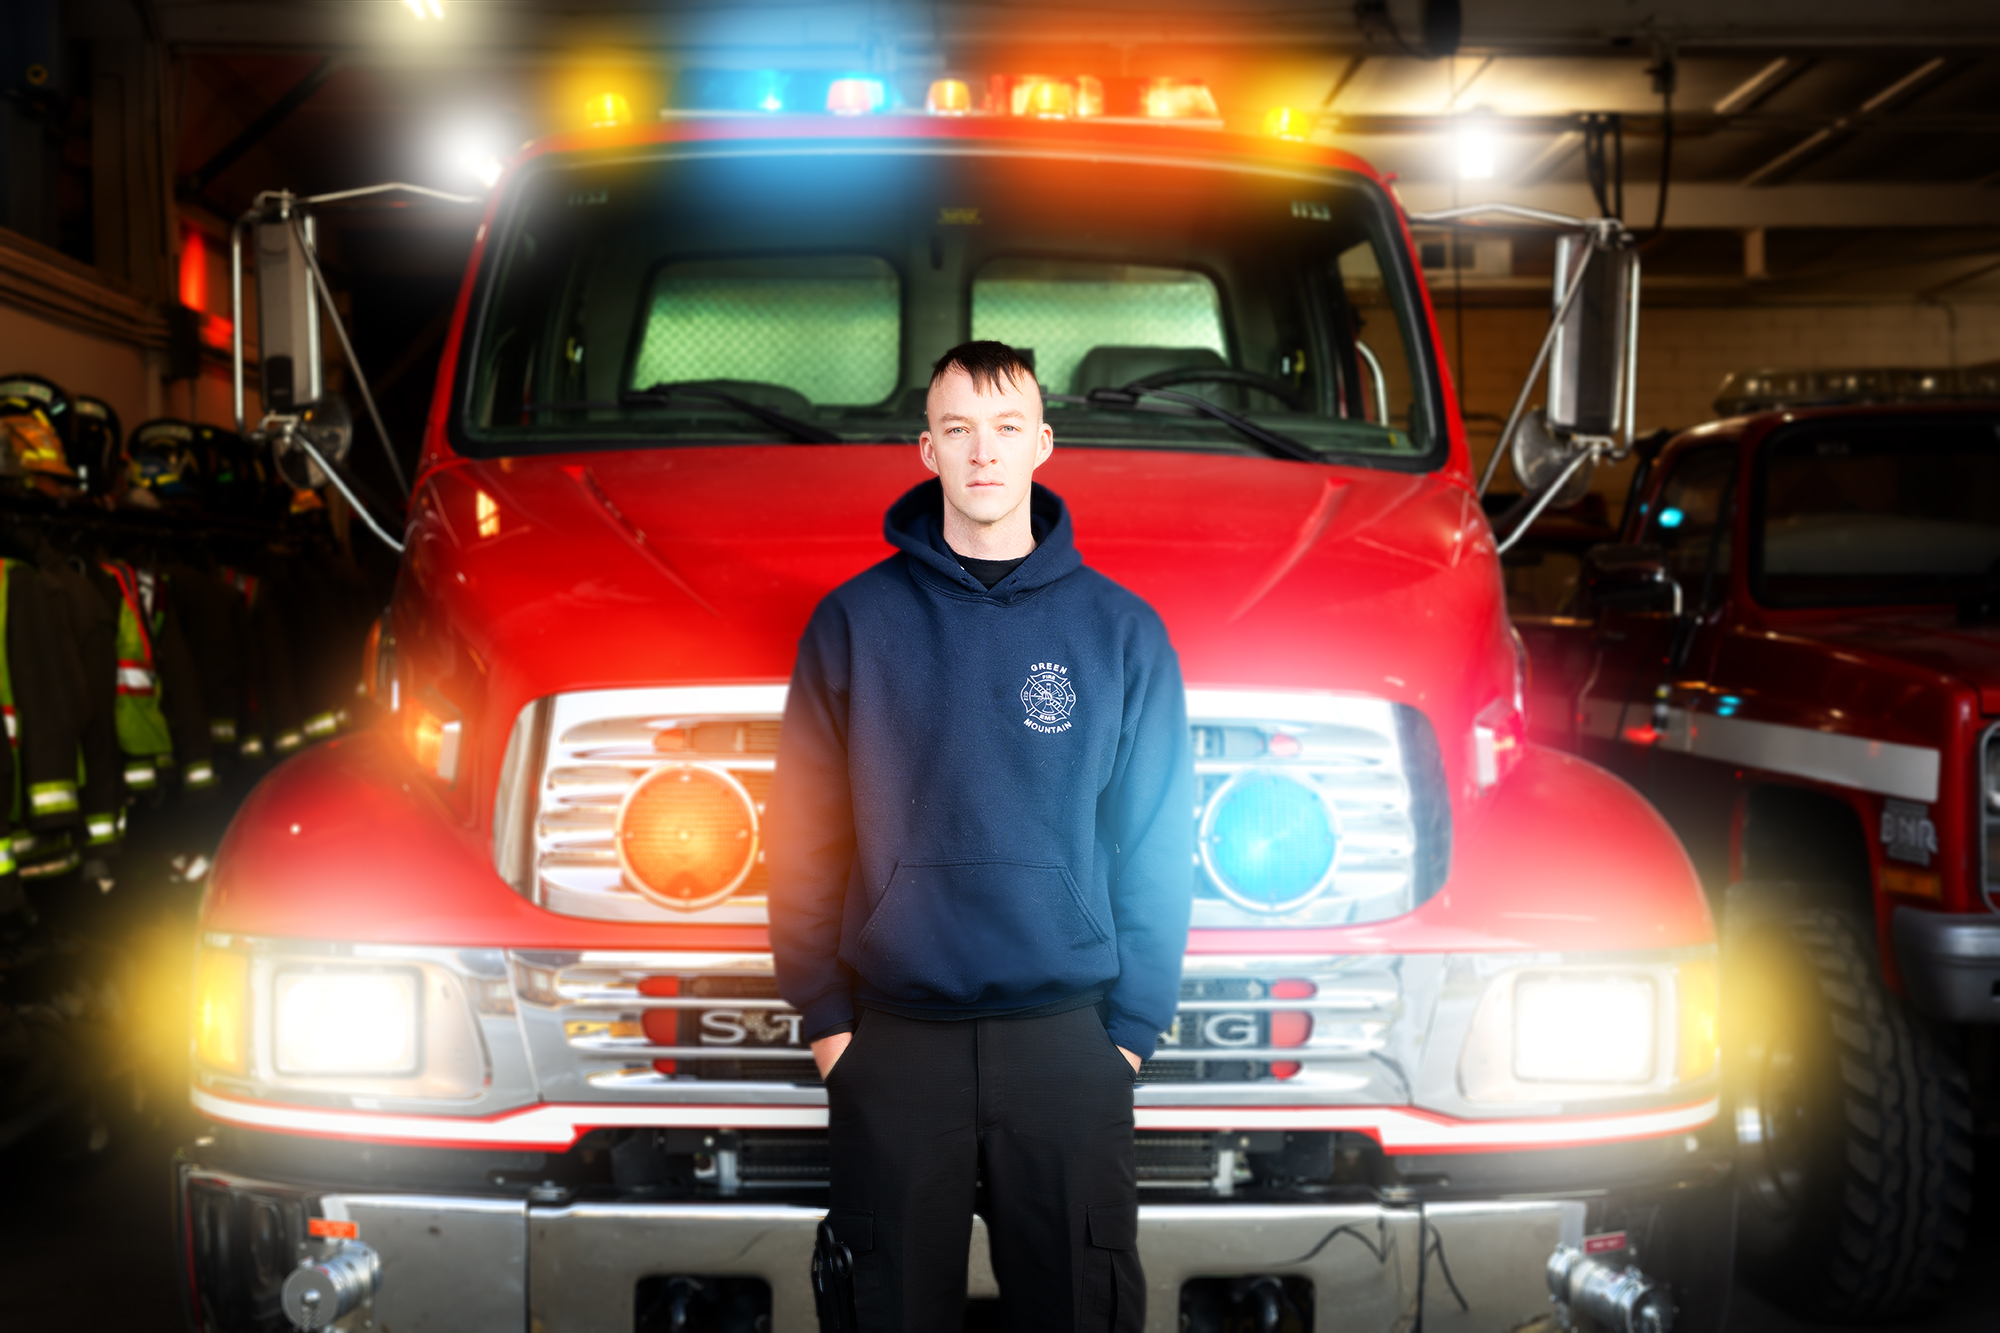 Grant Day standing before a firetruck in a garage stall at a station